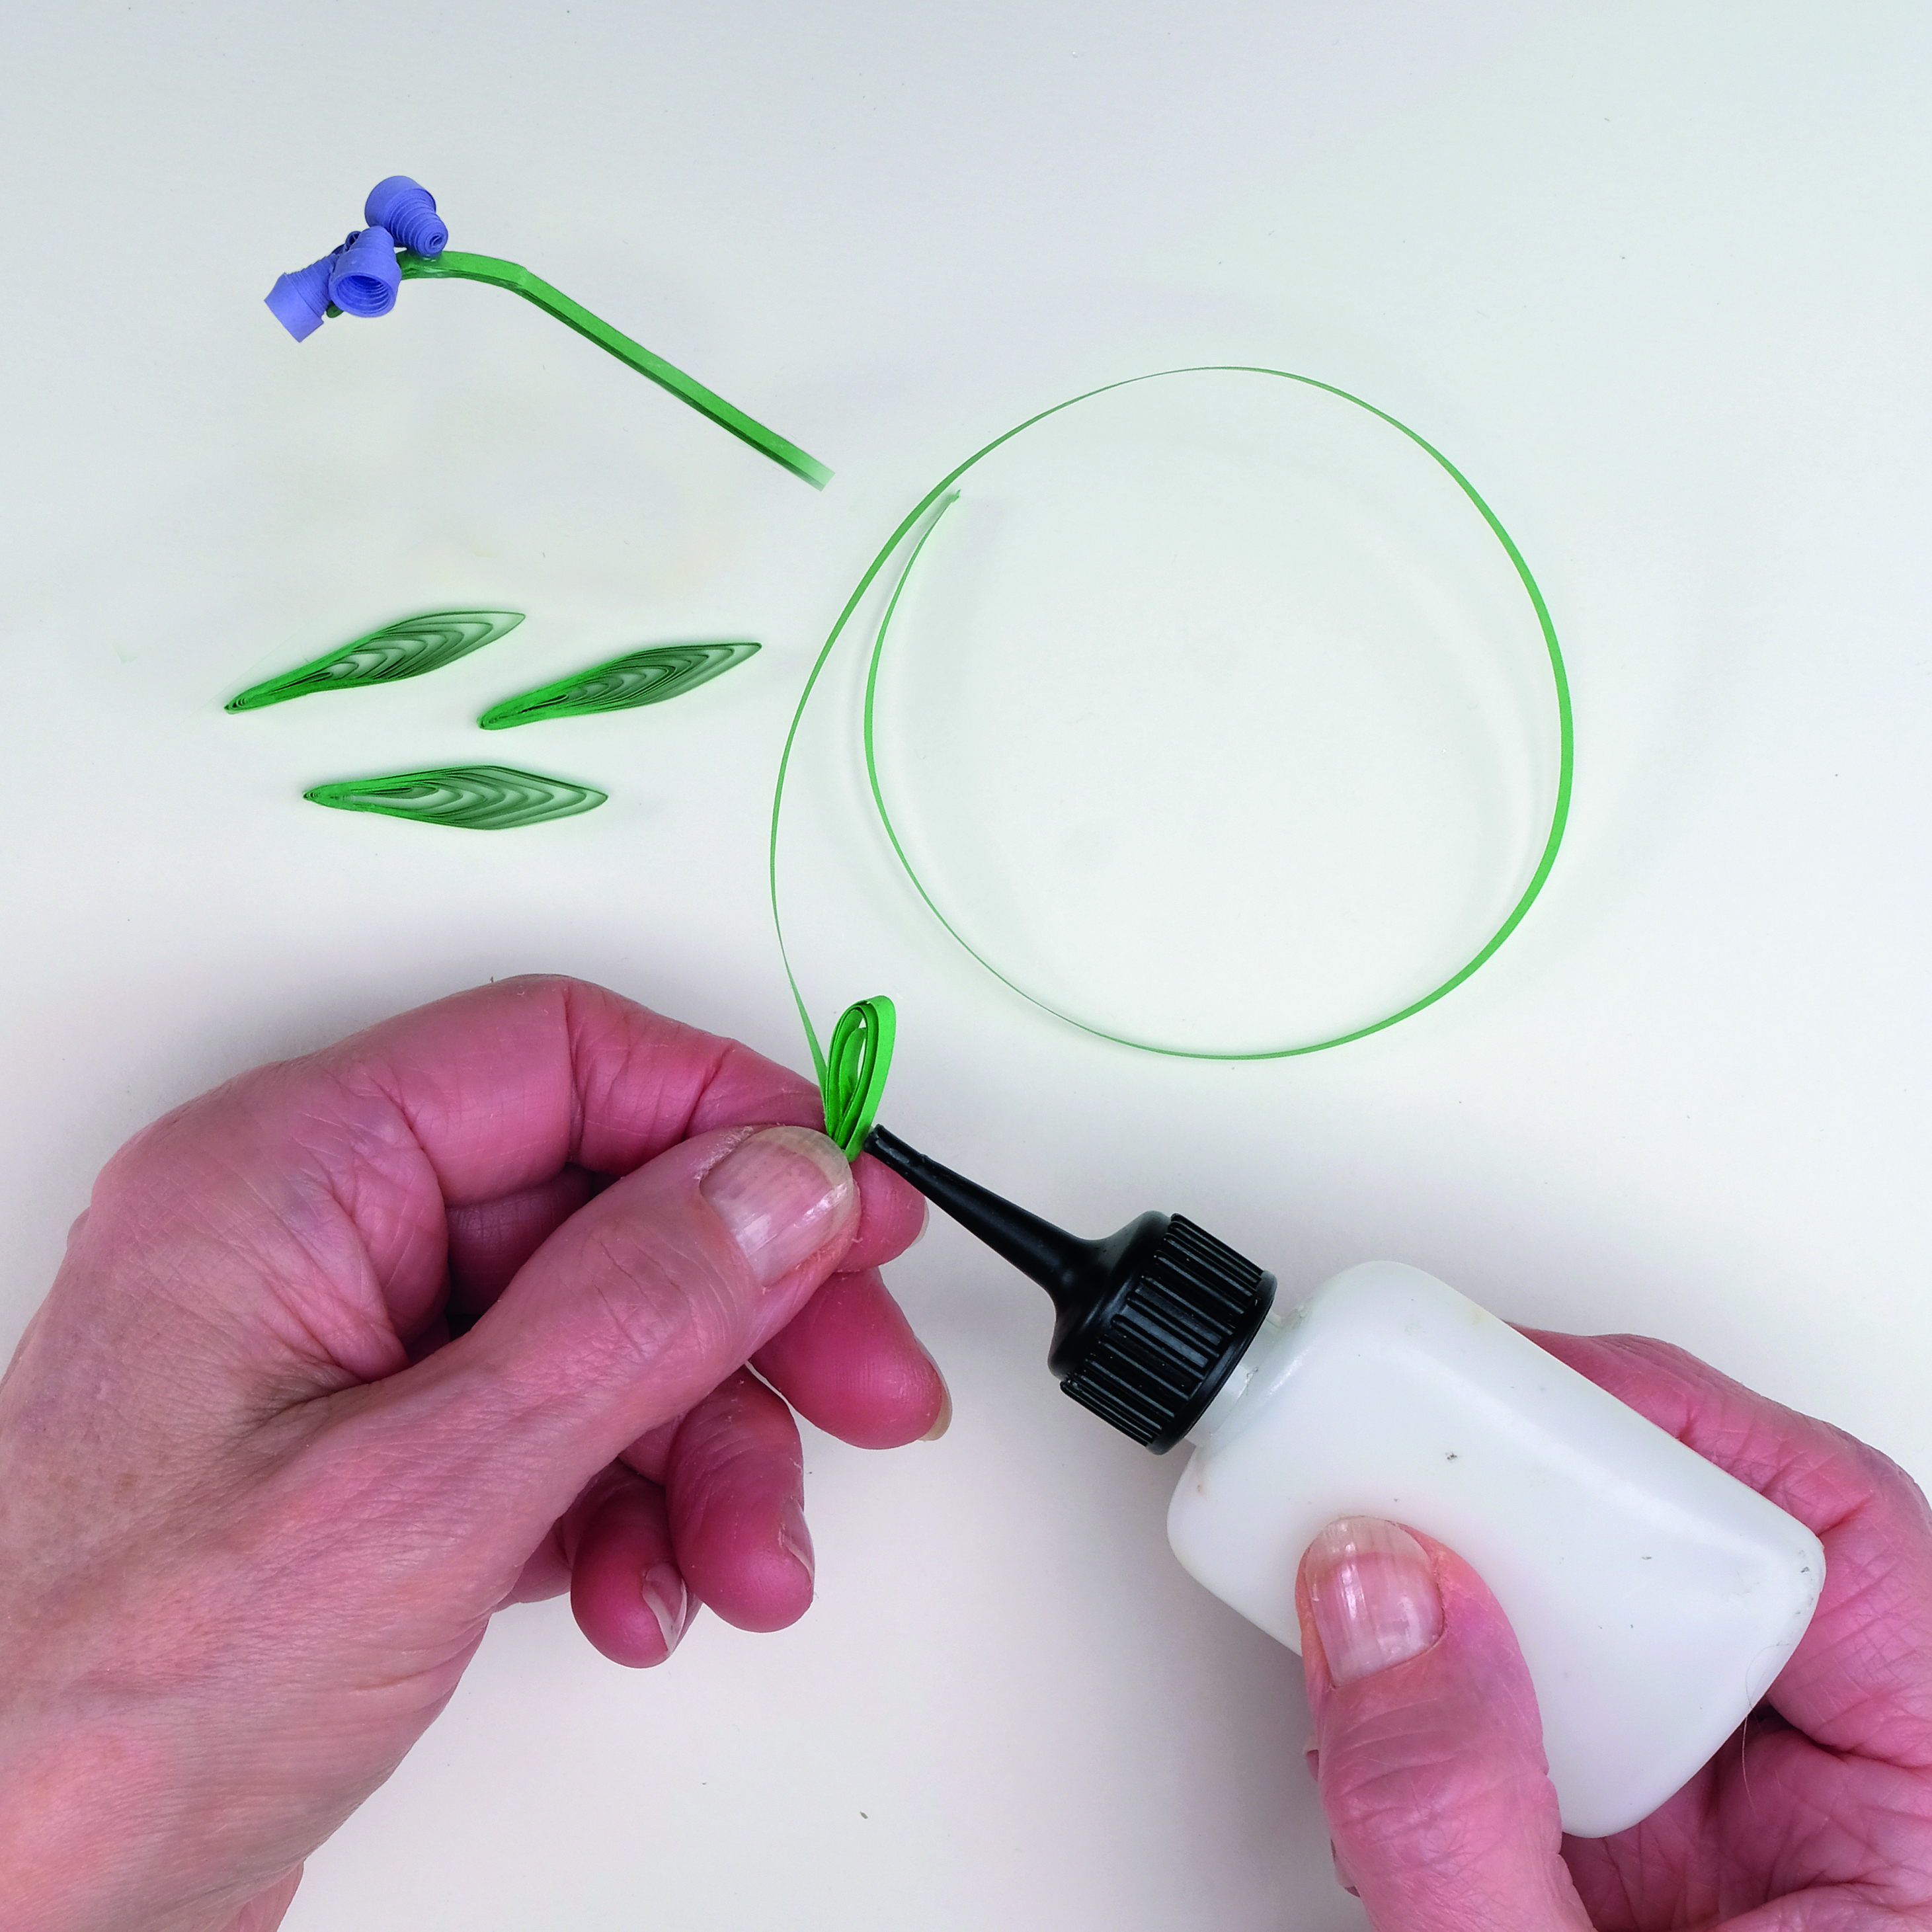 How to make quilled flowers – bluebells, step 3